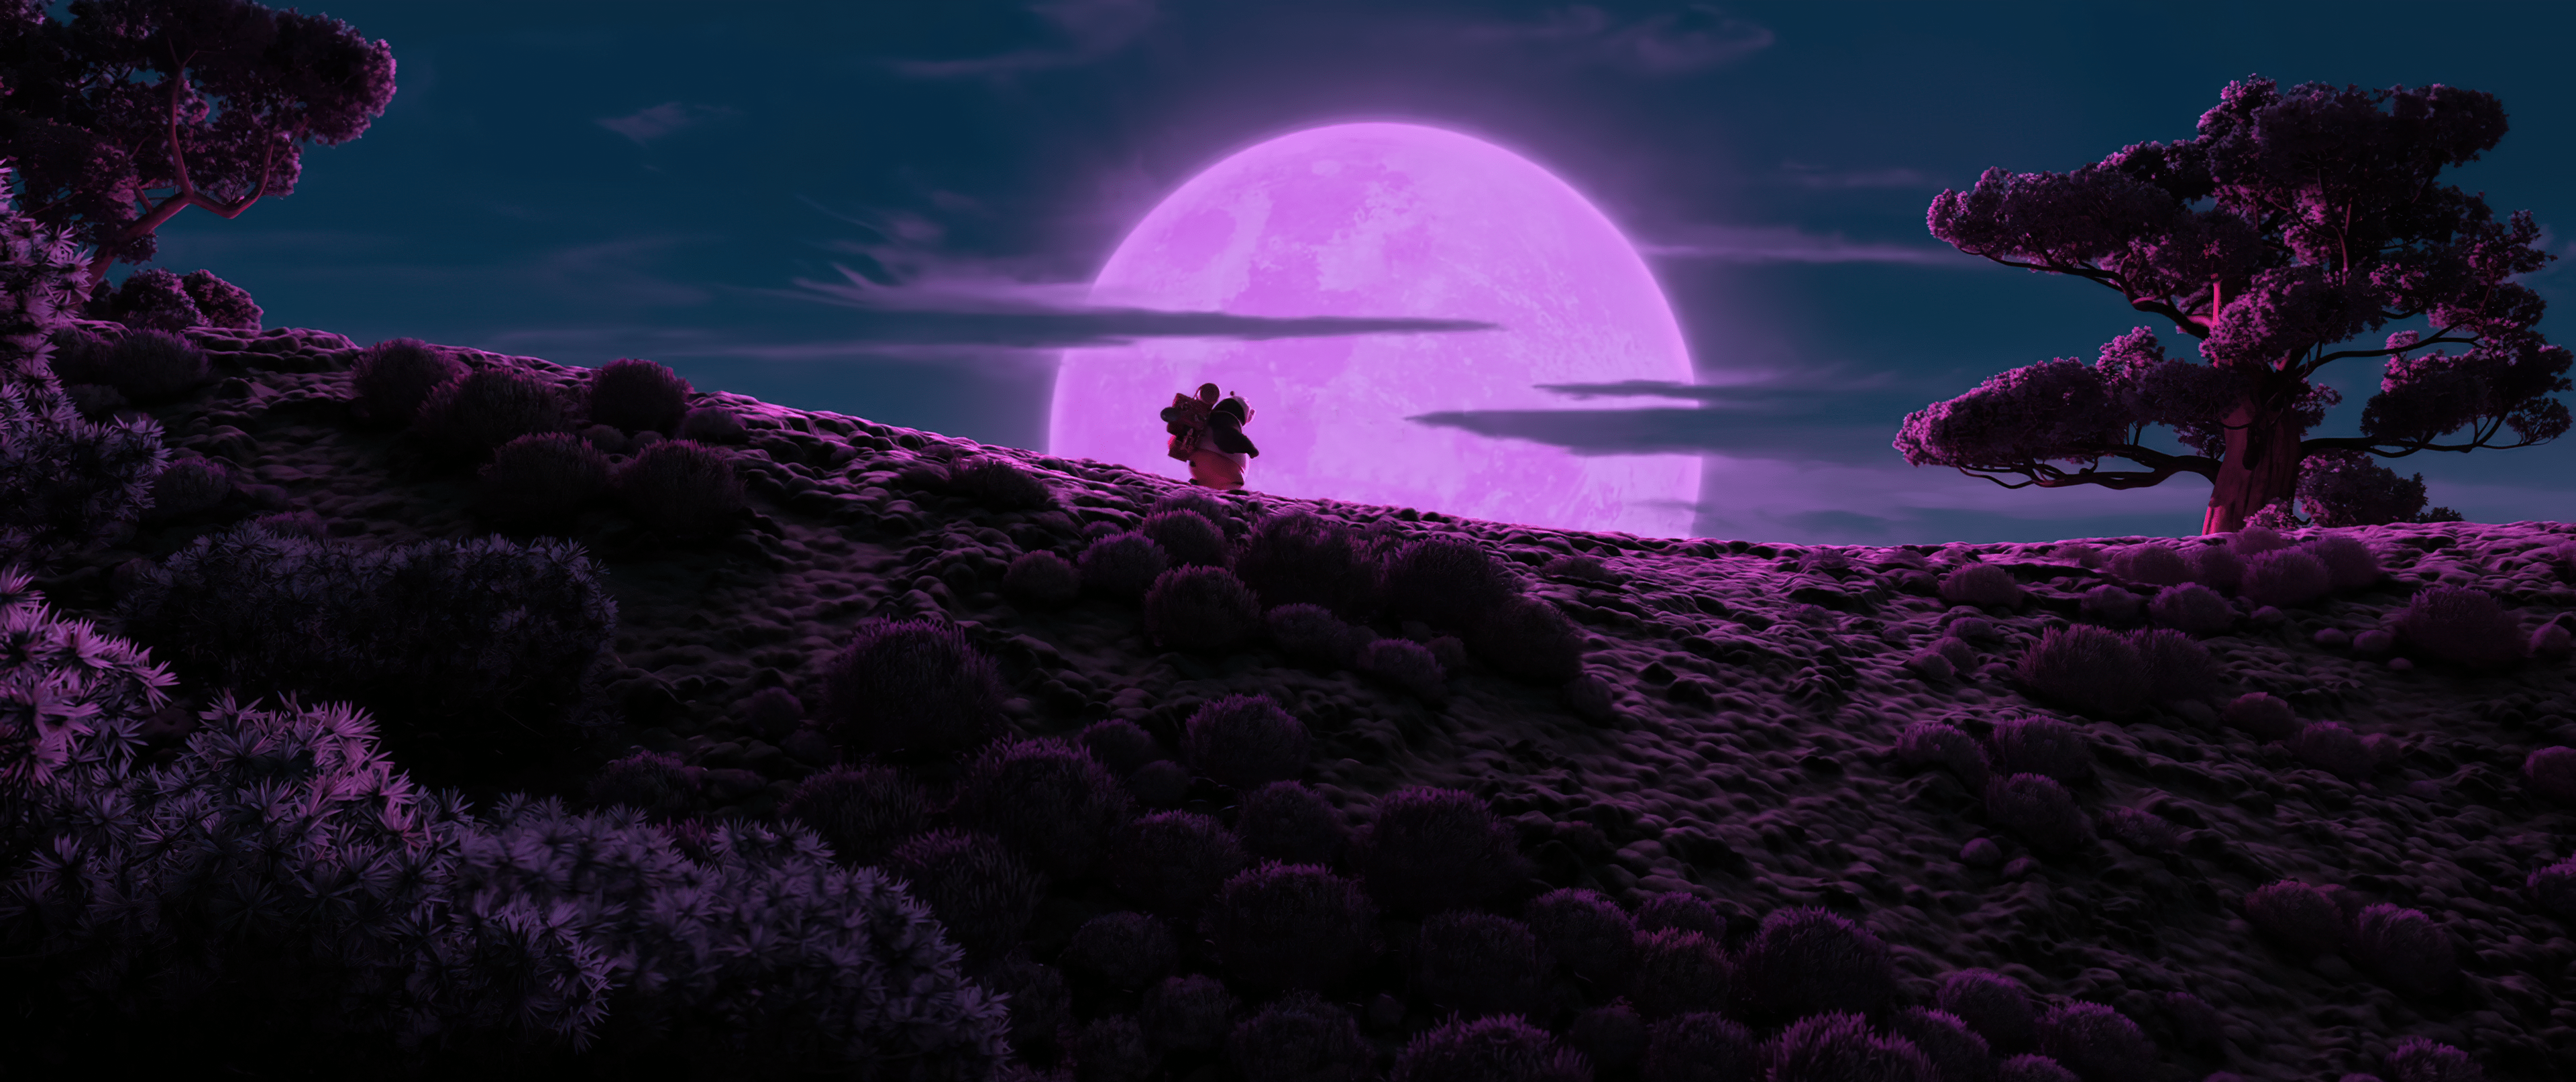 A person standing on a hill with a purple moon in the background - Panda